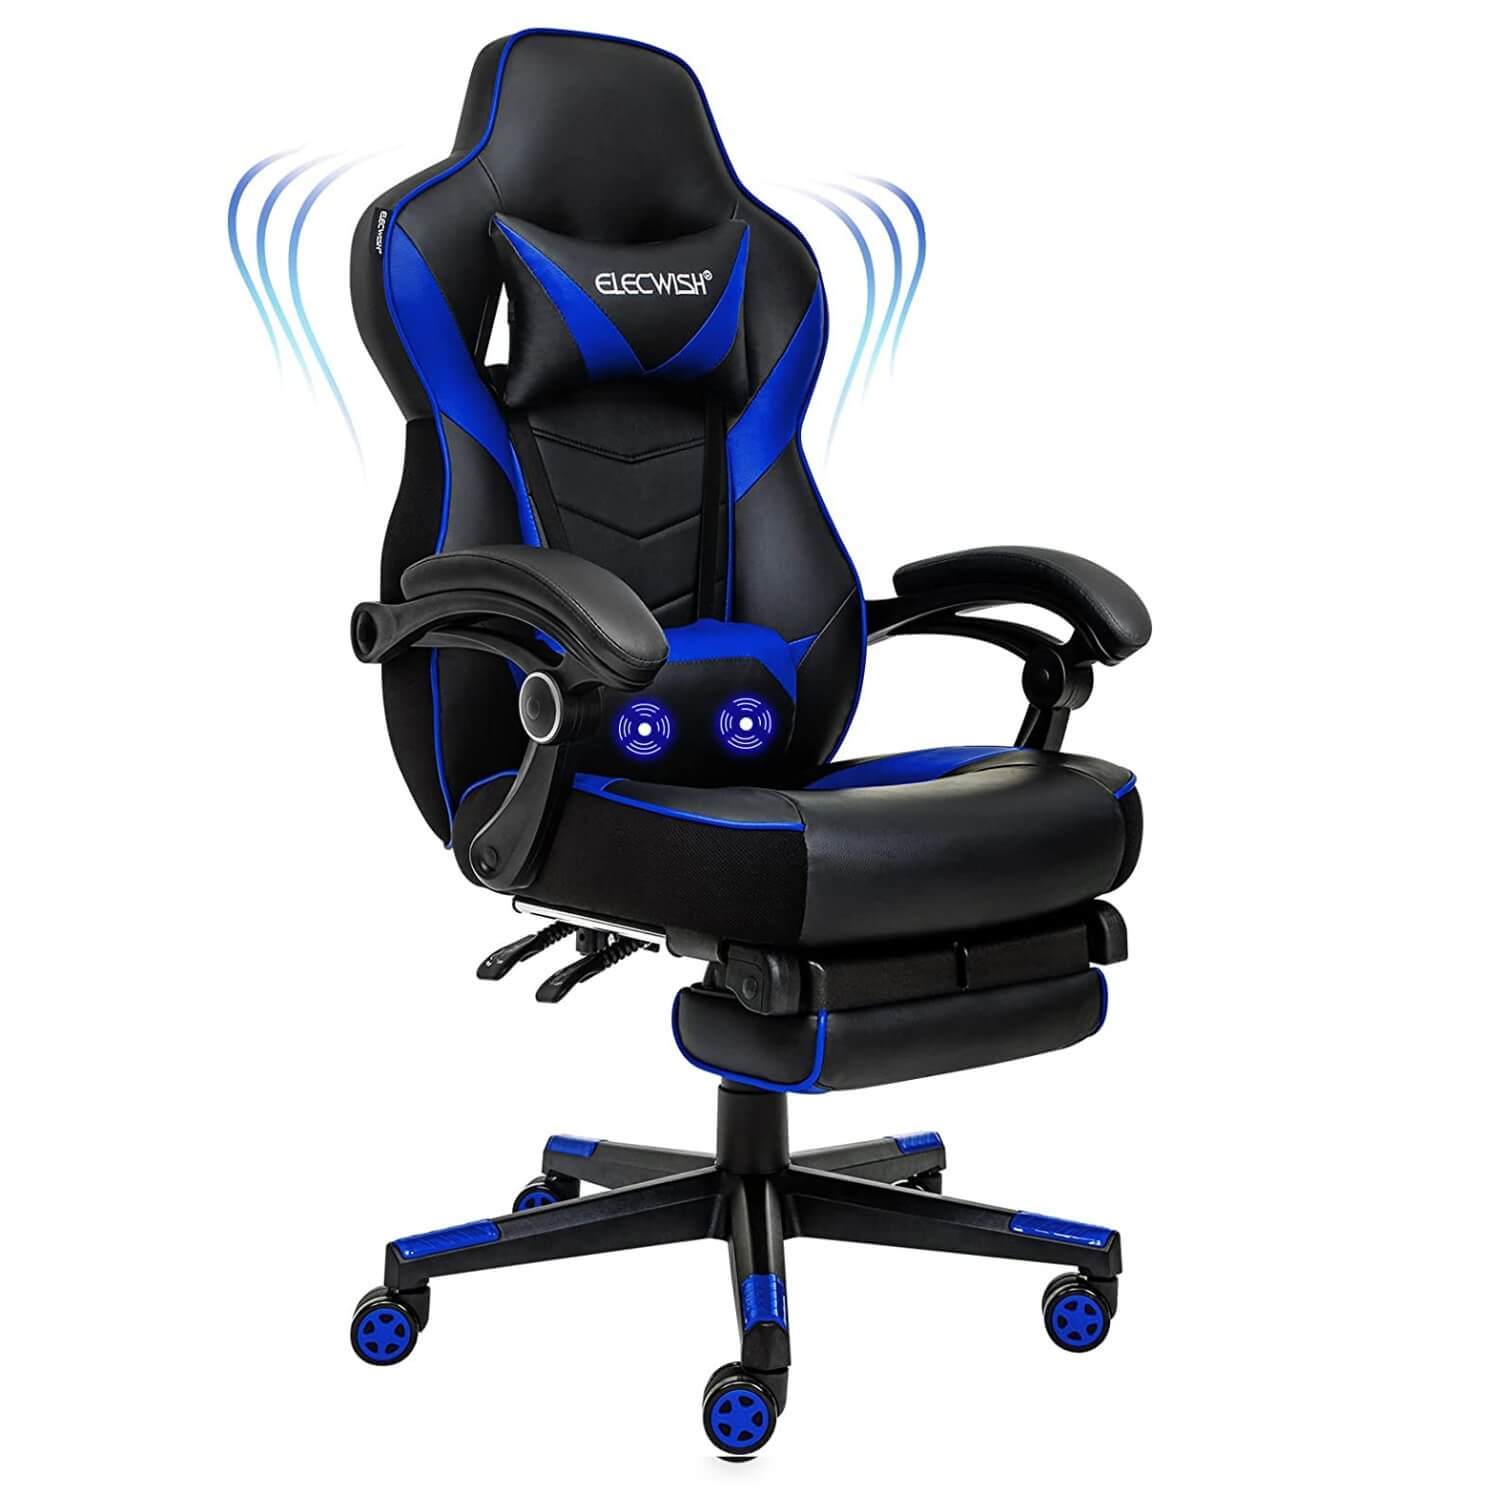 Elecwish massage gaming chair with footrest OC112 blue